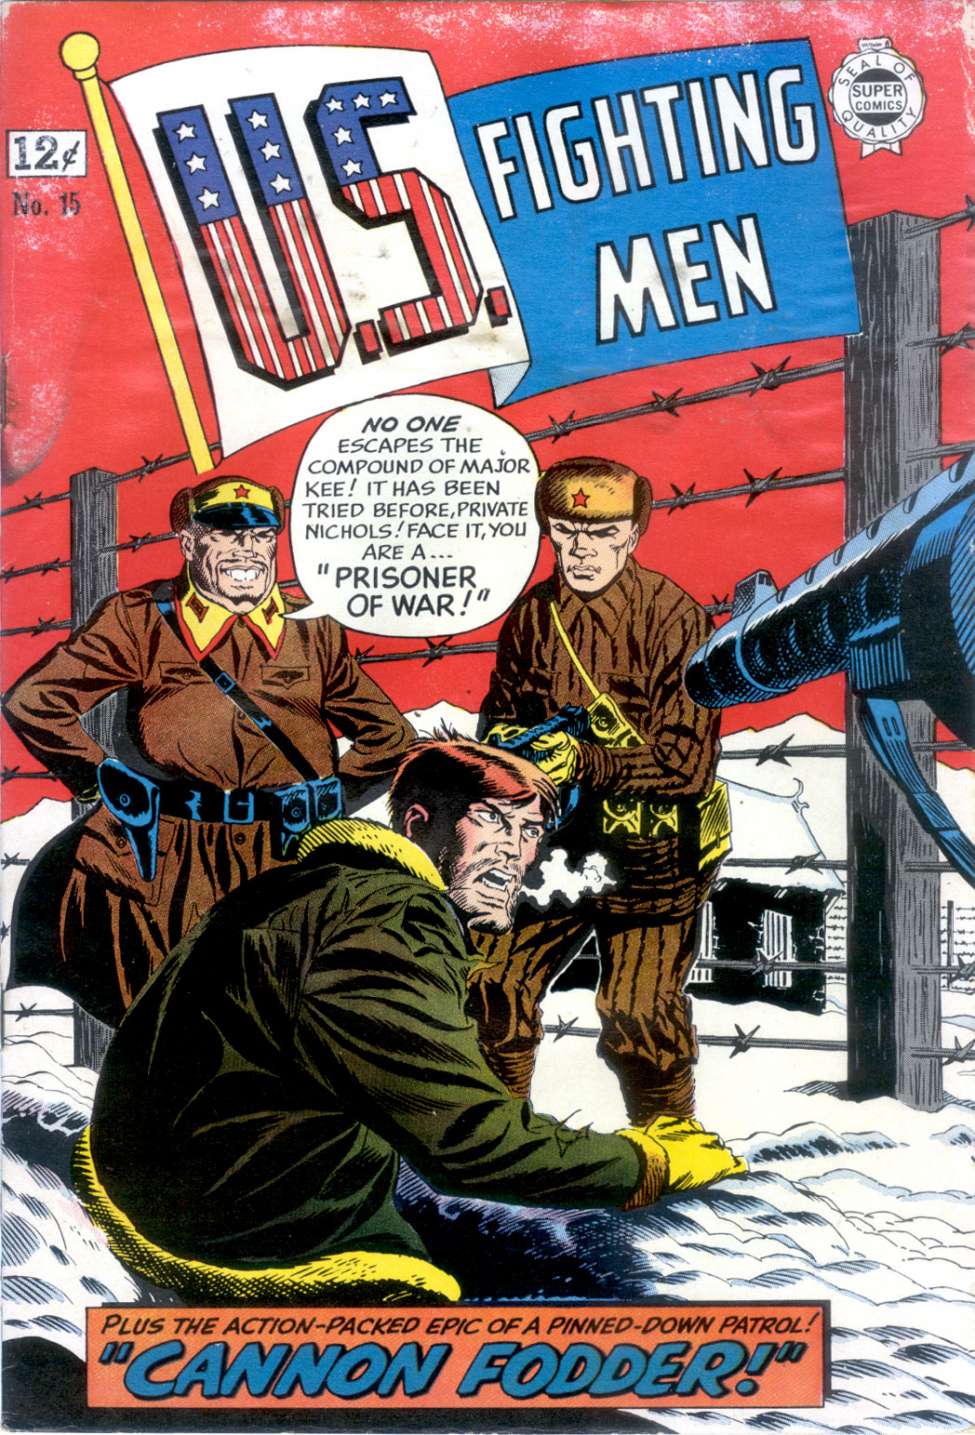 Book Cover For U.S. Fighting Men 15